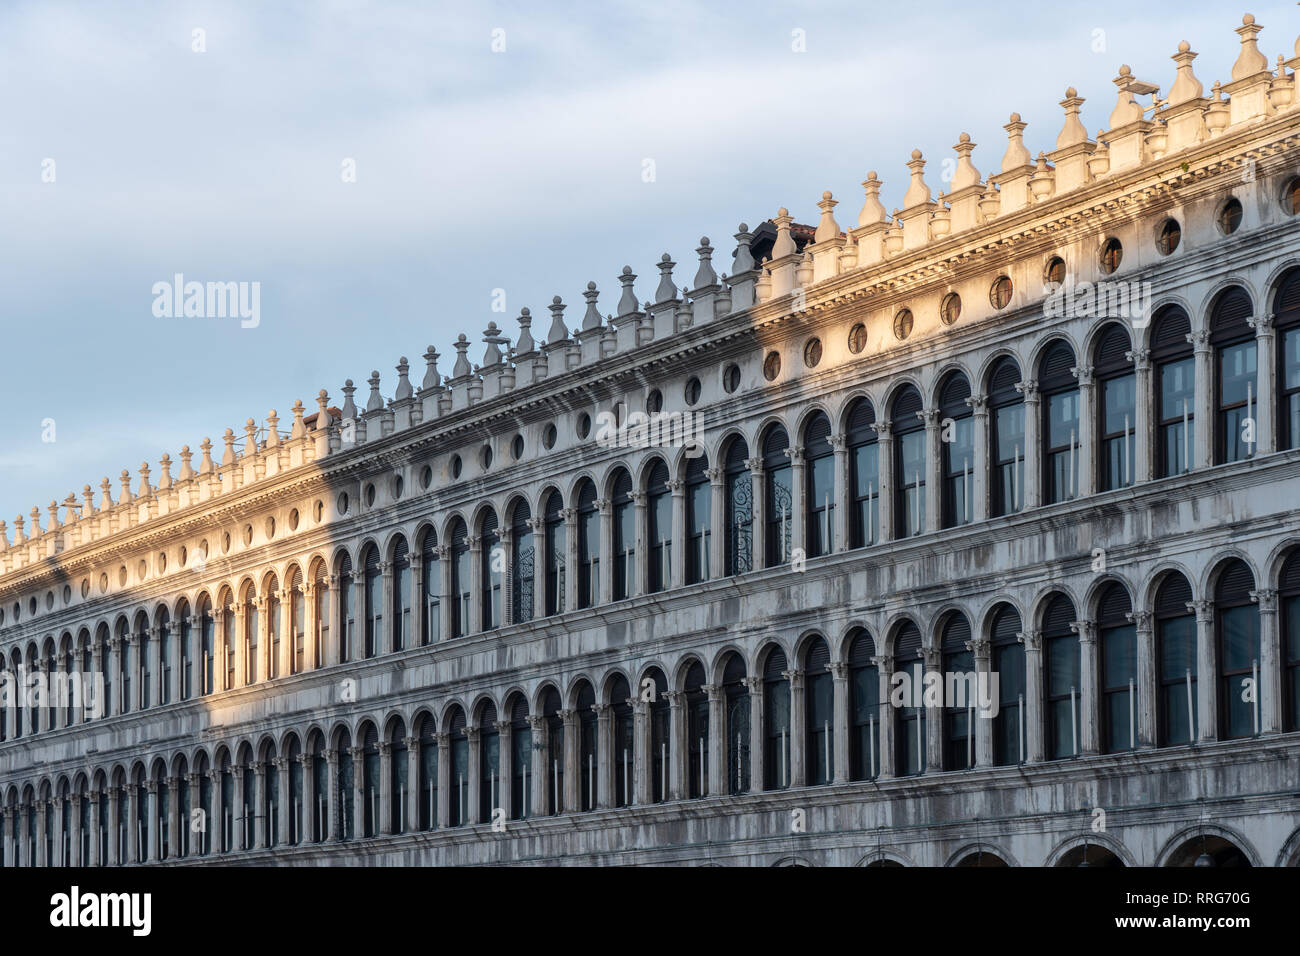 General views of St Mark's Square in Venice. From a series of travel photos in Italy. Photo date: Tuesday, February 12, 2019. Photo: Roger Garfield/Al Stock Photo